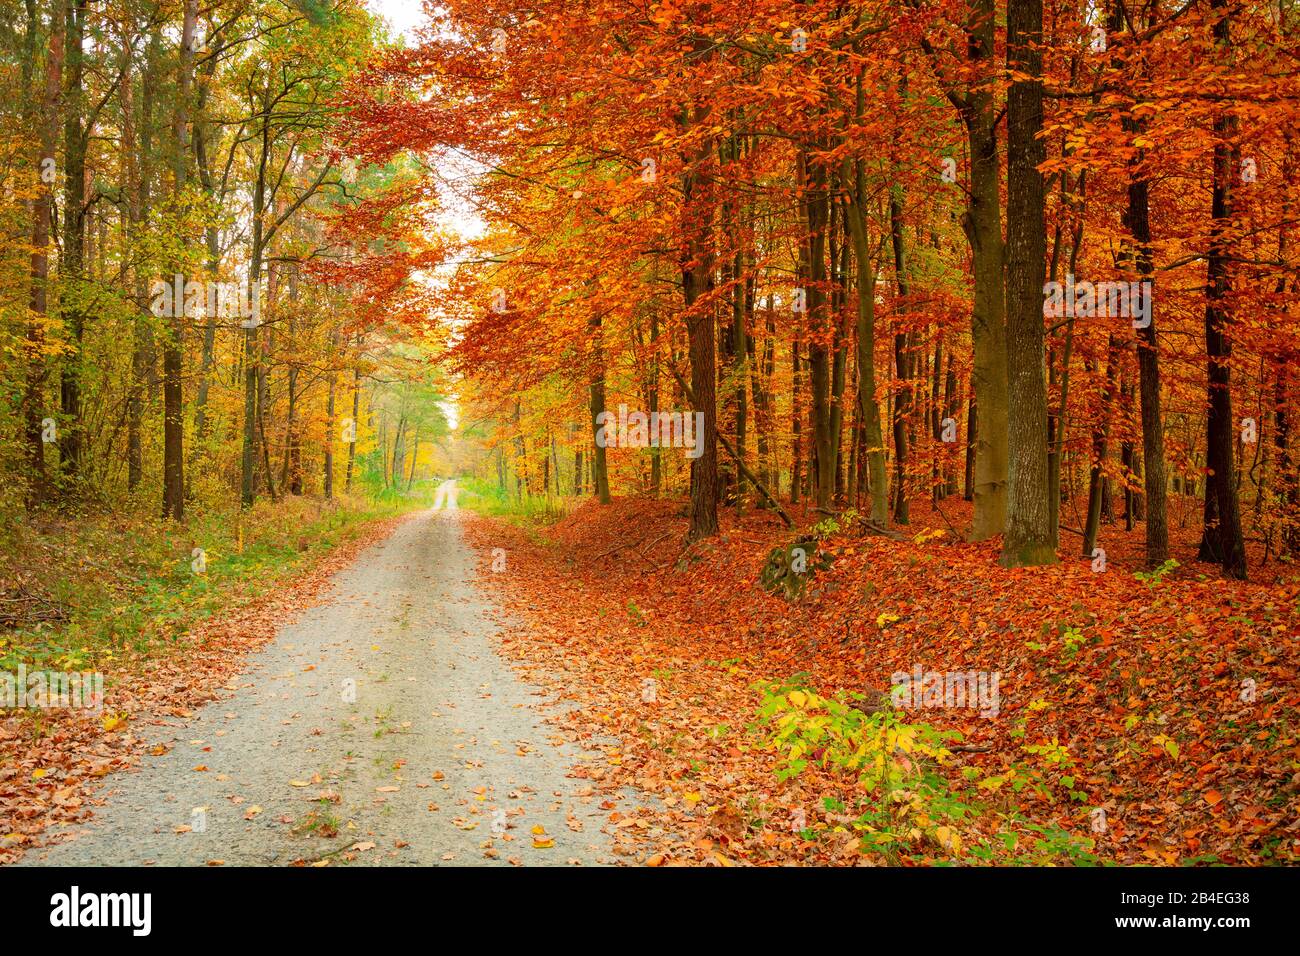 A straight road through a colorful autumn forest Stock Photo